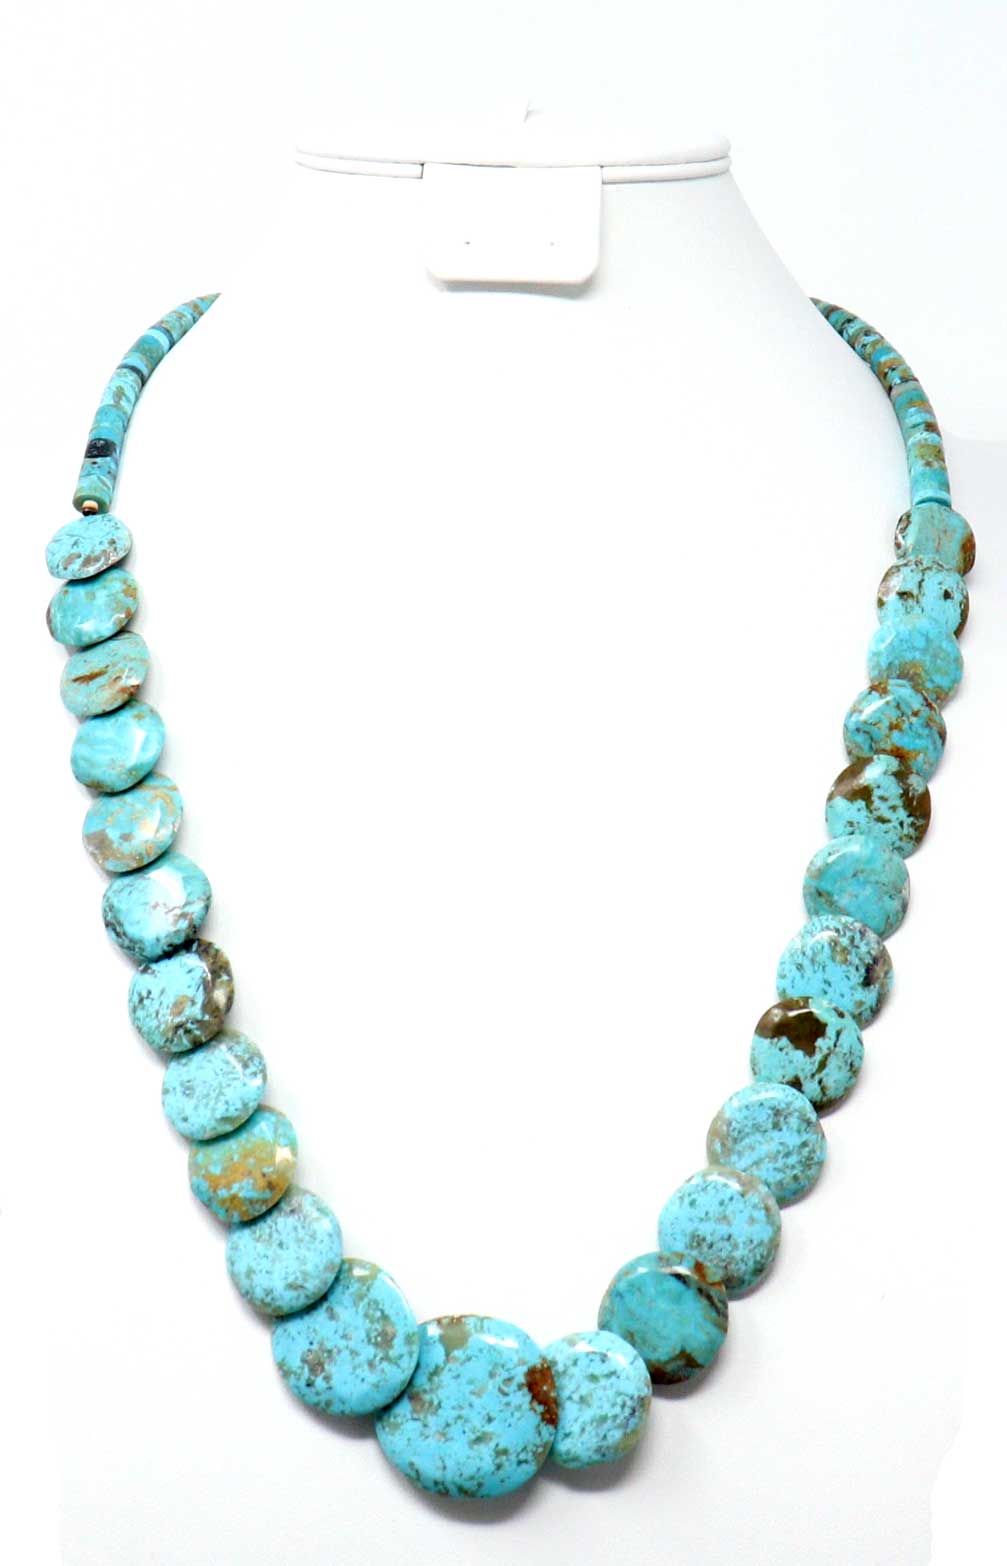 27" Graduated Turquoise Bead Necklace by Garcia